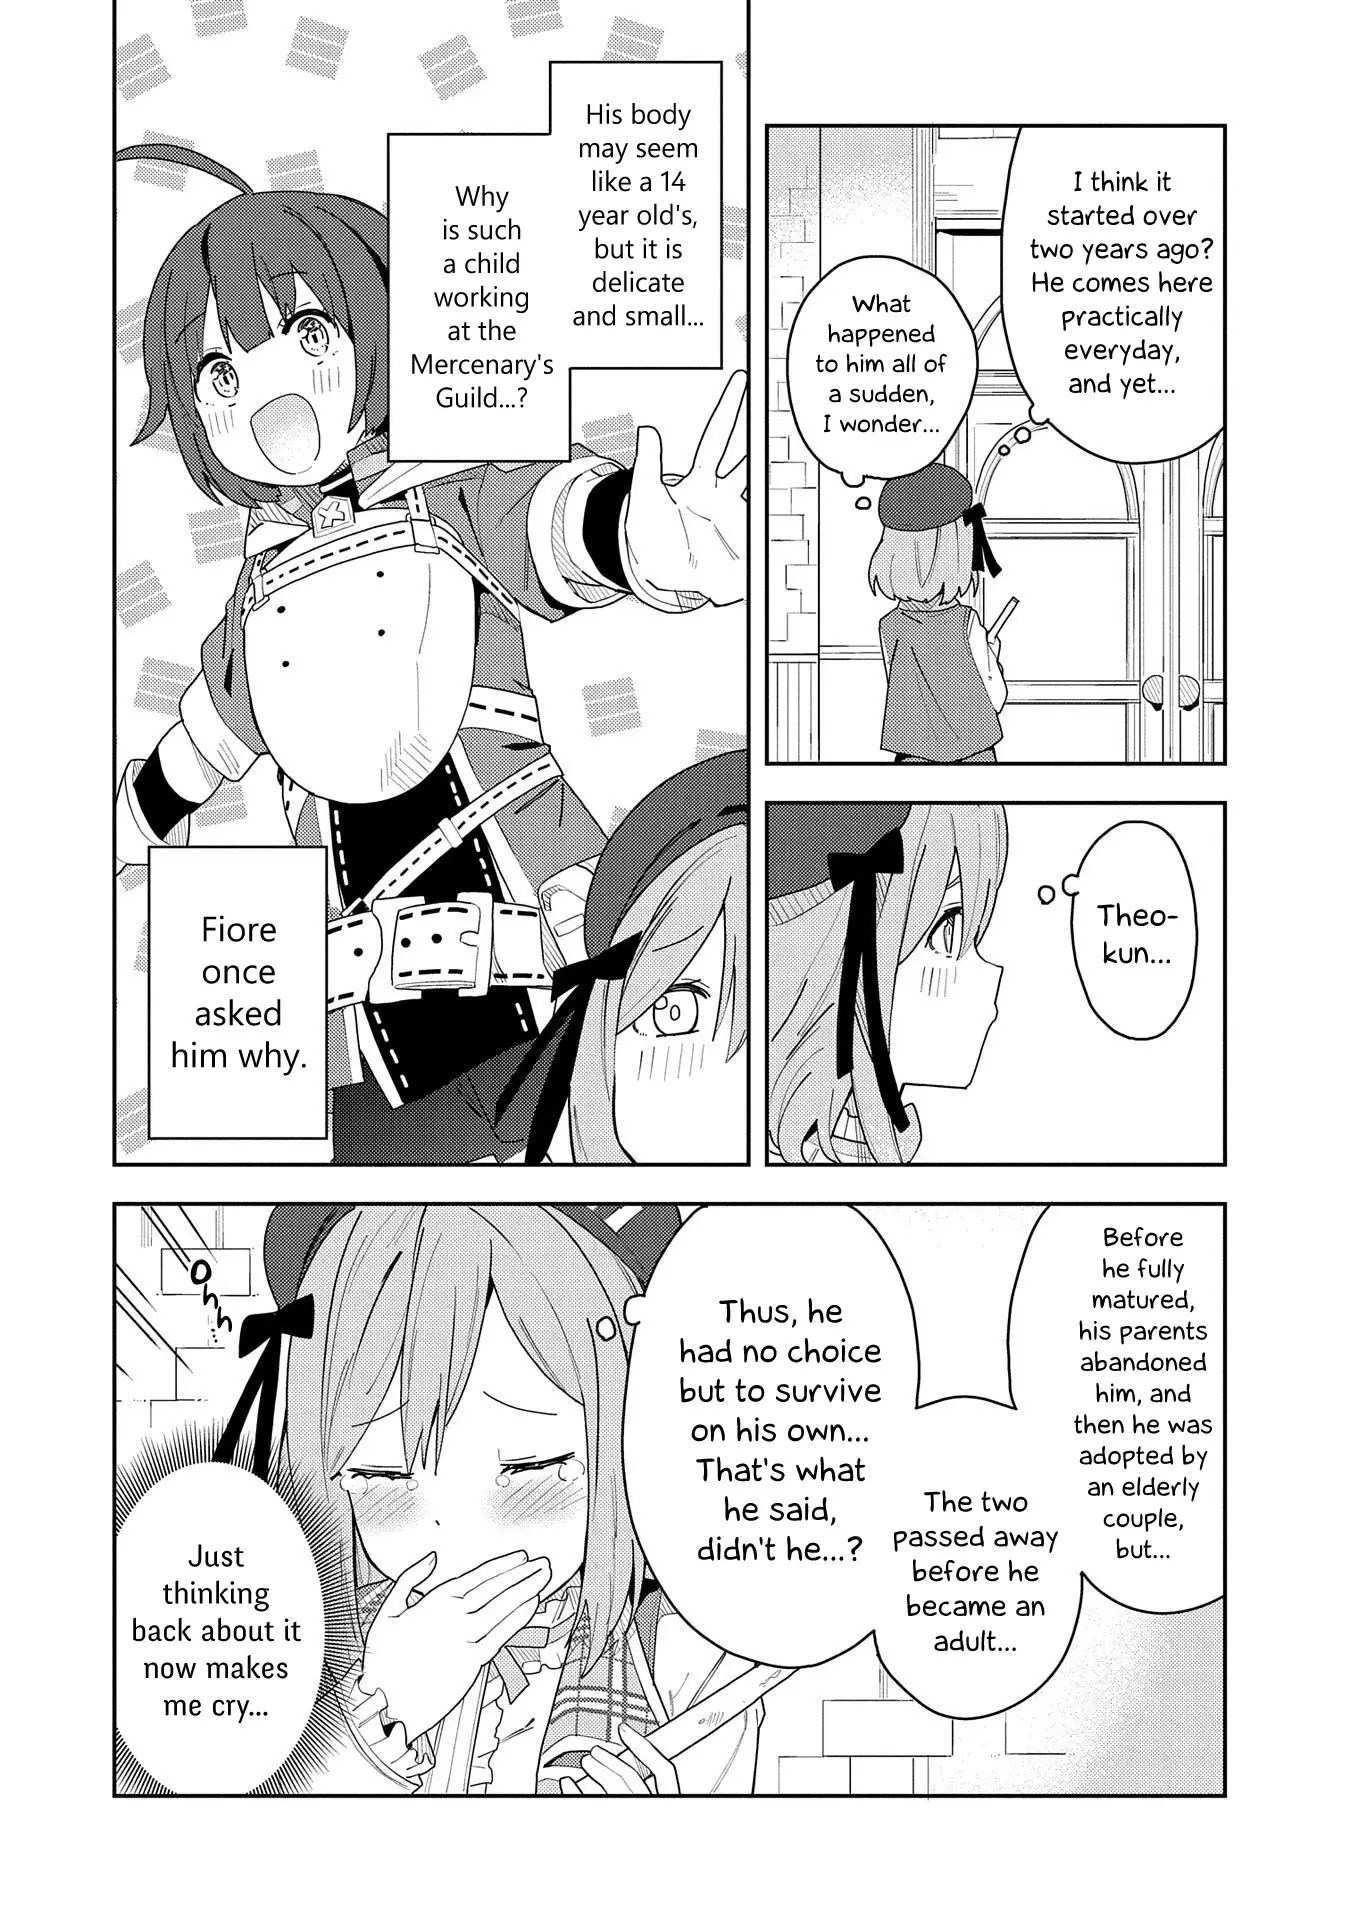 I Summoned The Devil To Grant Me A Wish, But I Married Her Instead Since She Was Adorable ~My New Devil Wife~ - 2 page 4